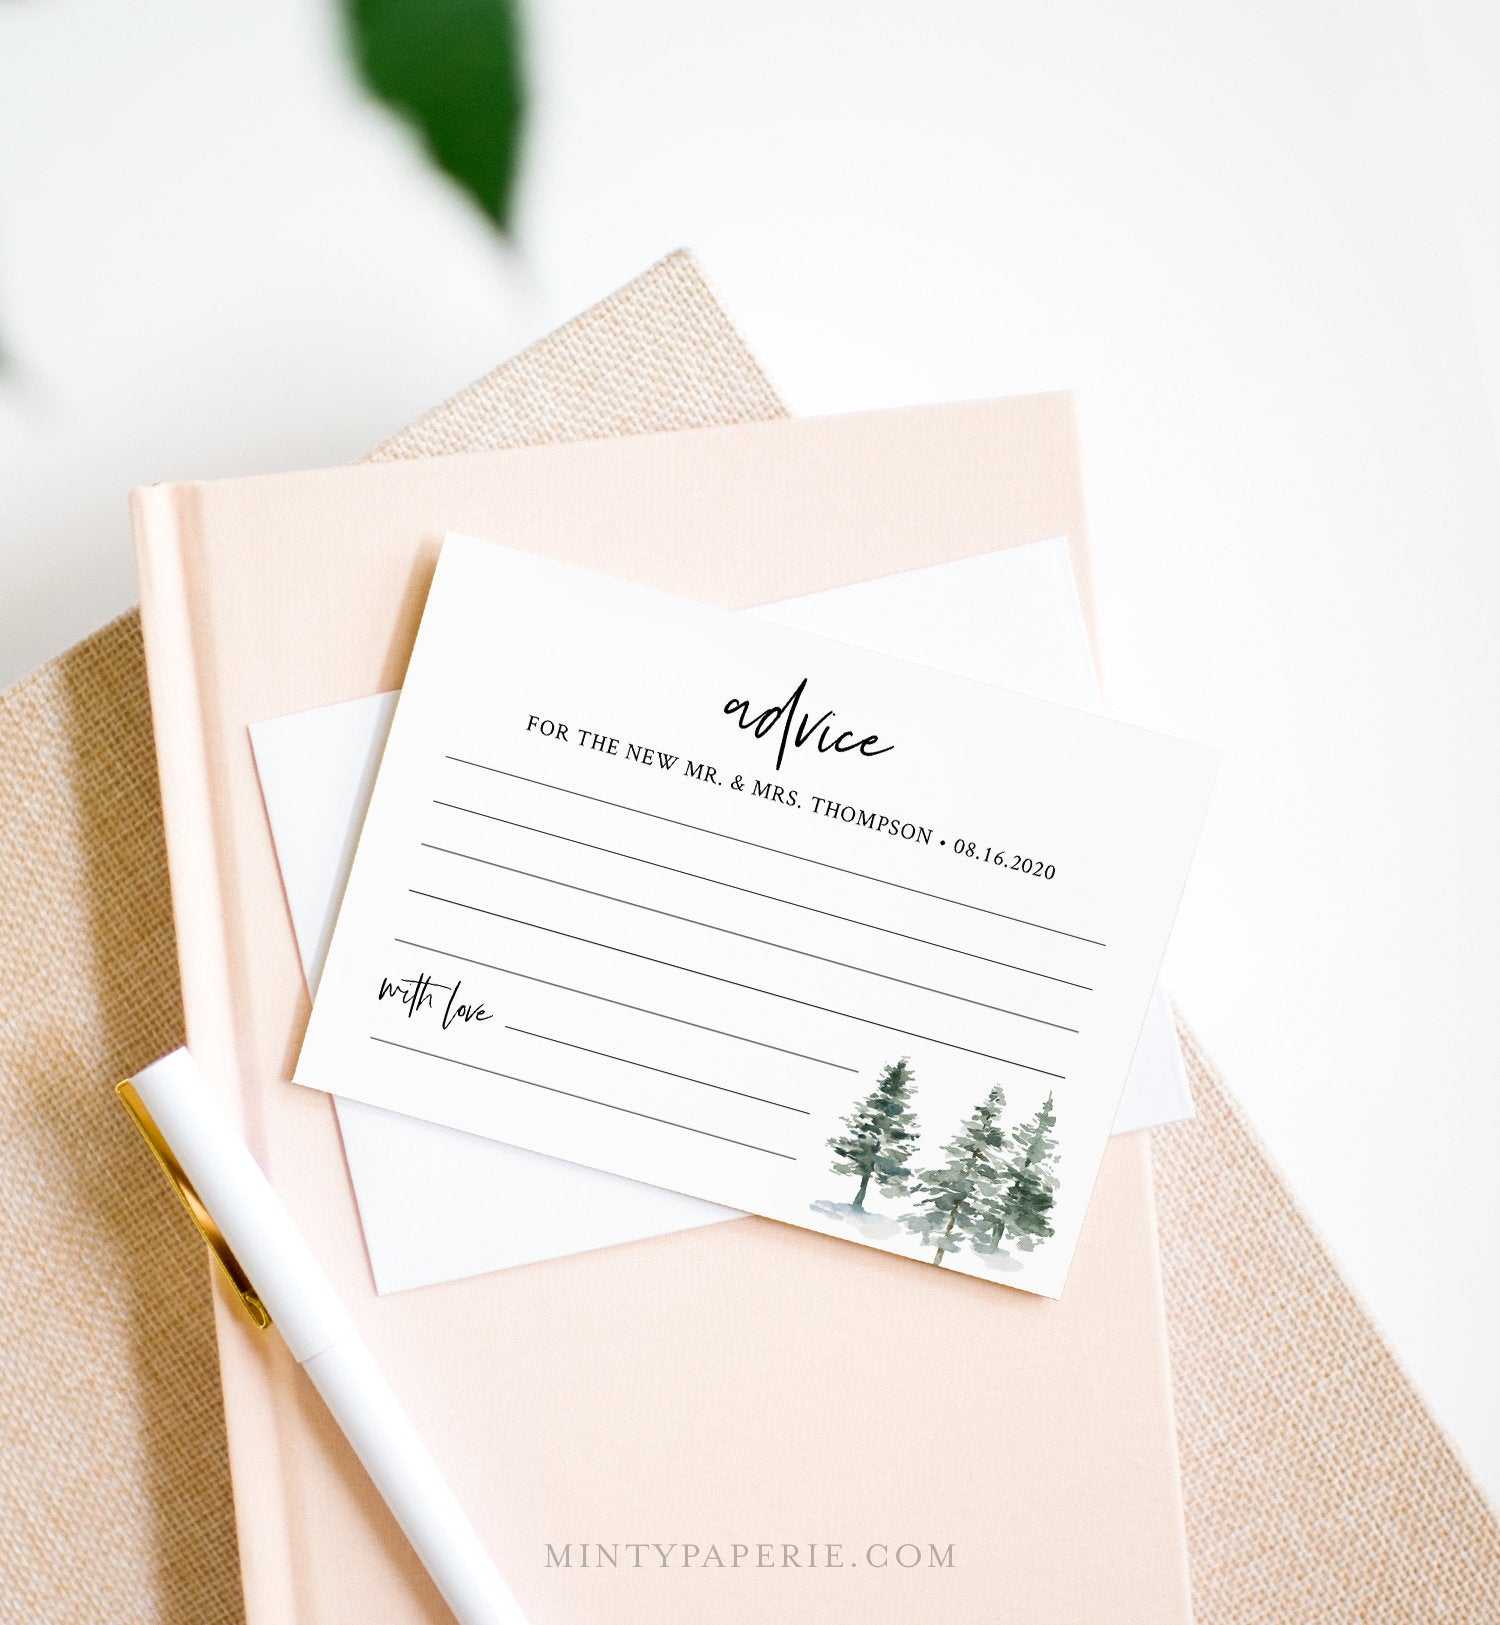 Wedding Advice Card Template, Printable Bridal Shower Within Marriage Advice Cards Templates